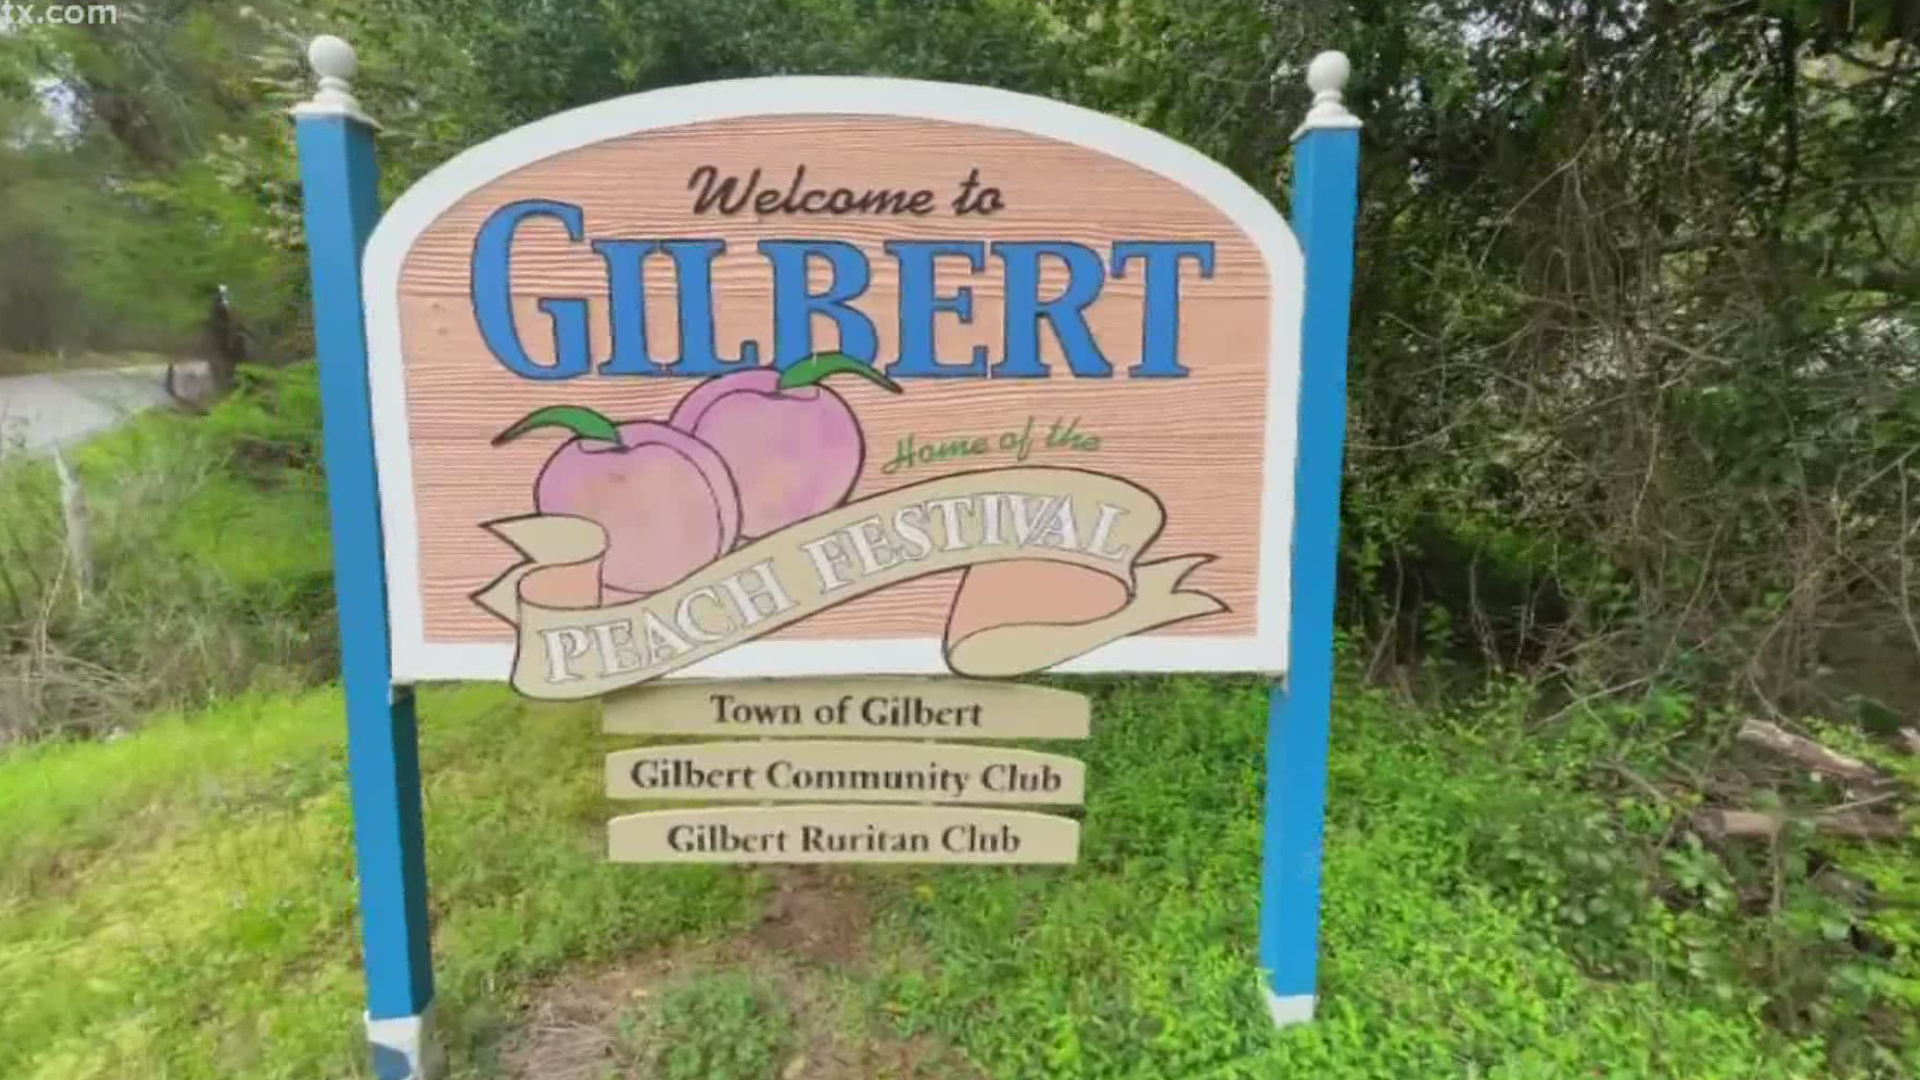 The Fourth of July Gilbert Peach festival is postponed again this year due to the pandemic.